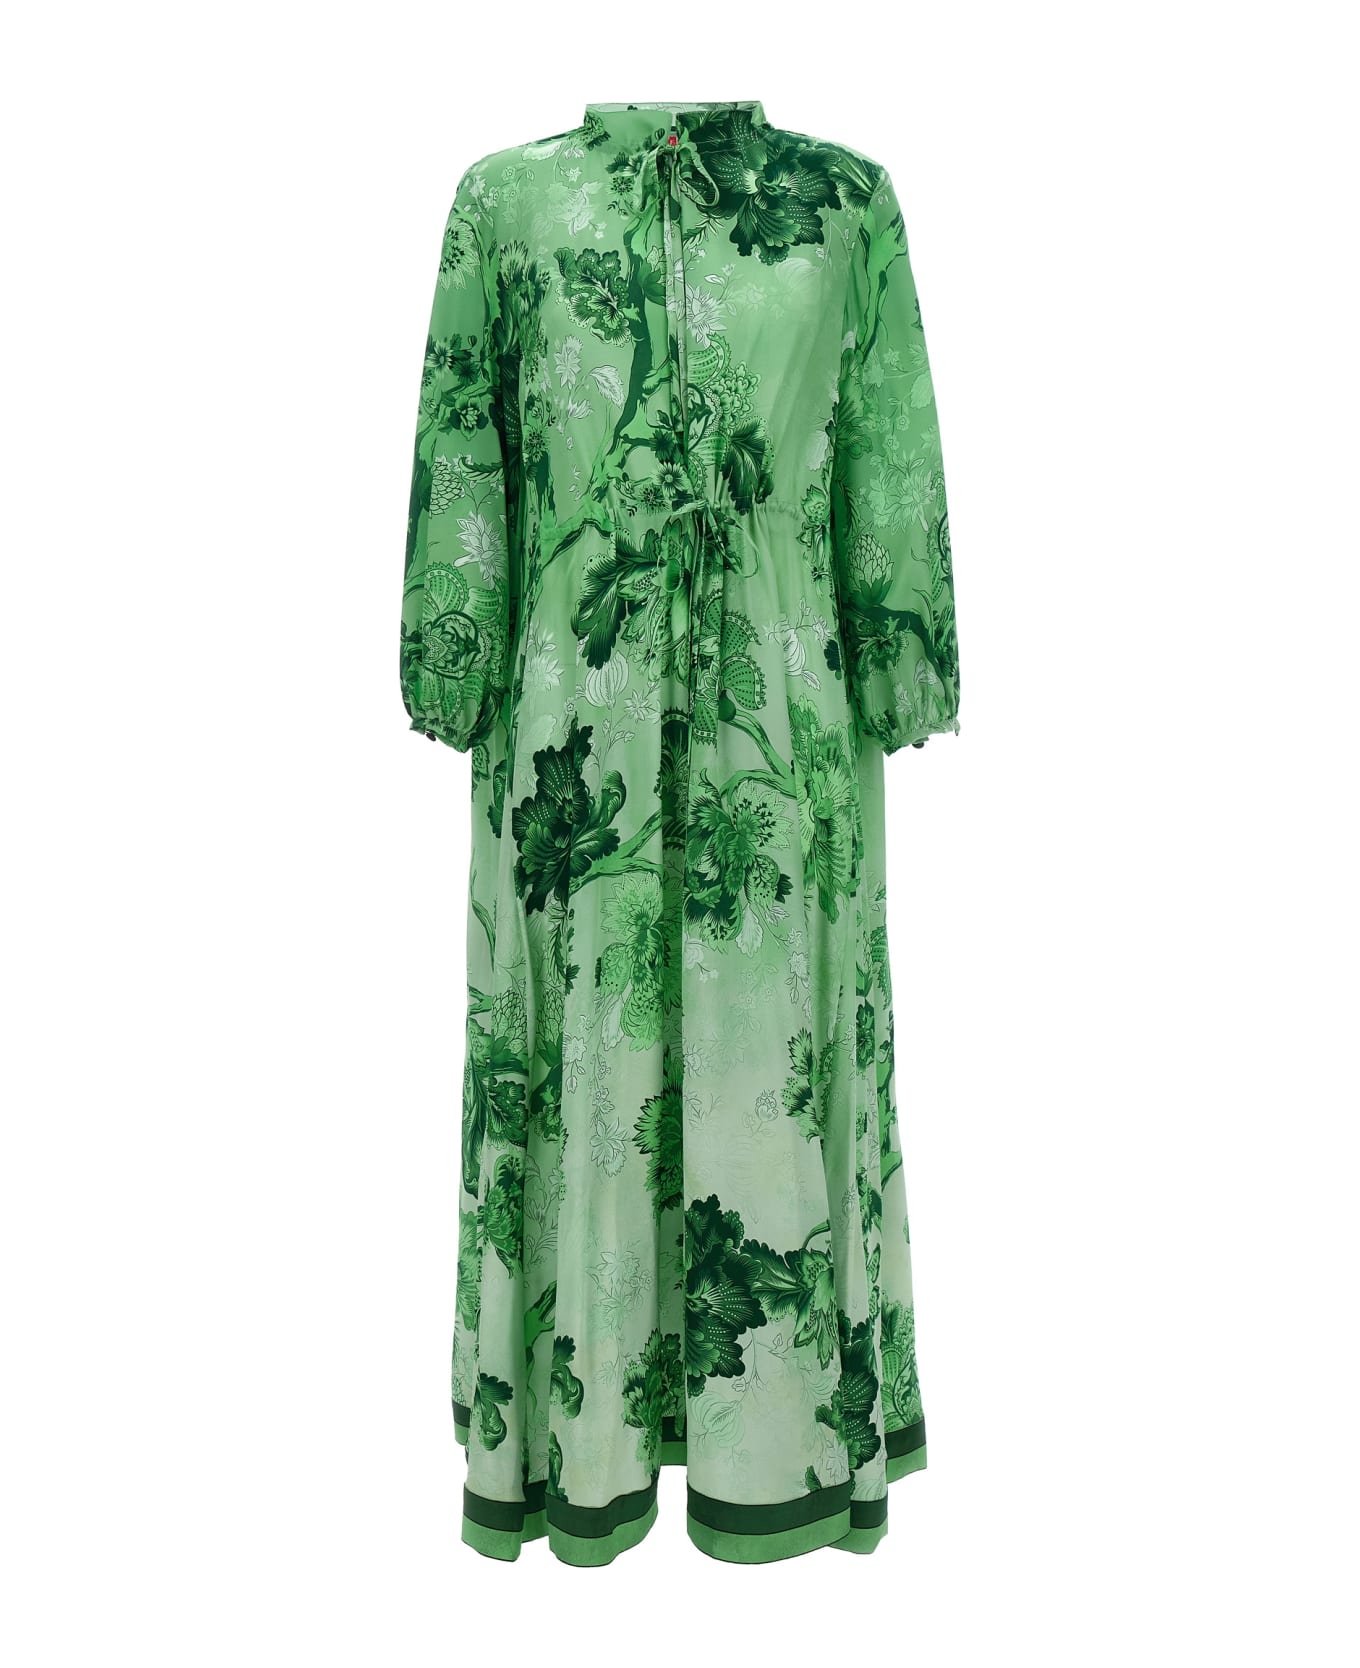 For Restless Sleepers 'eione' Dress - Green